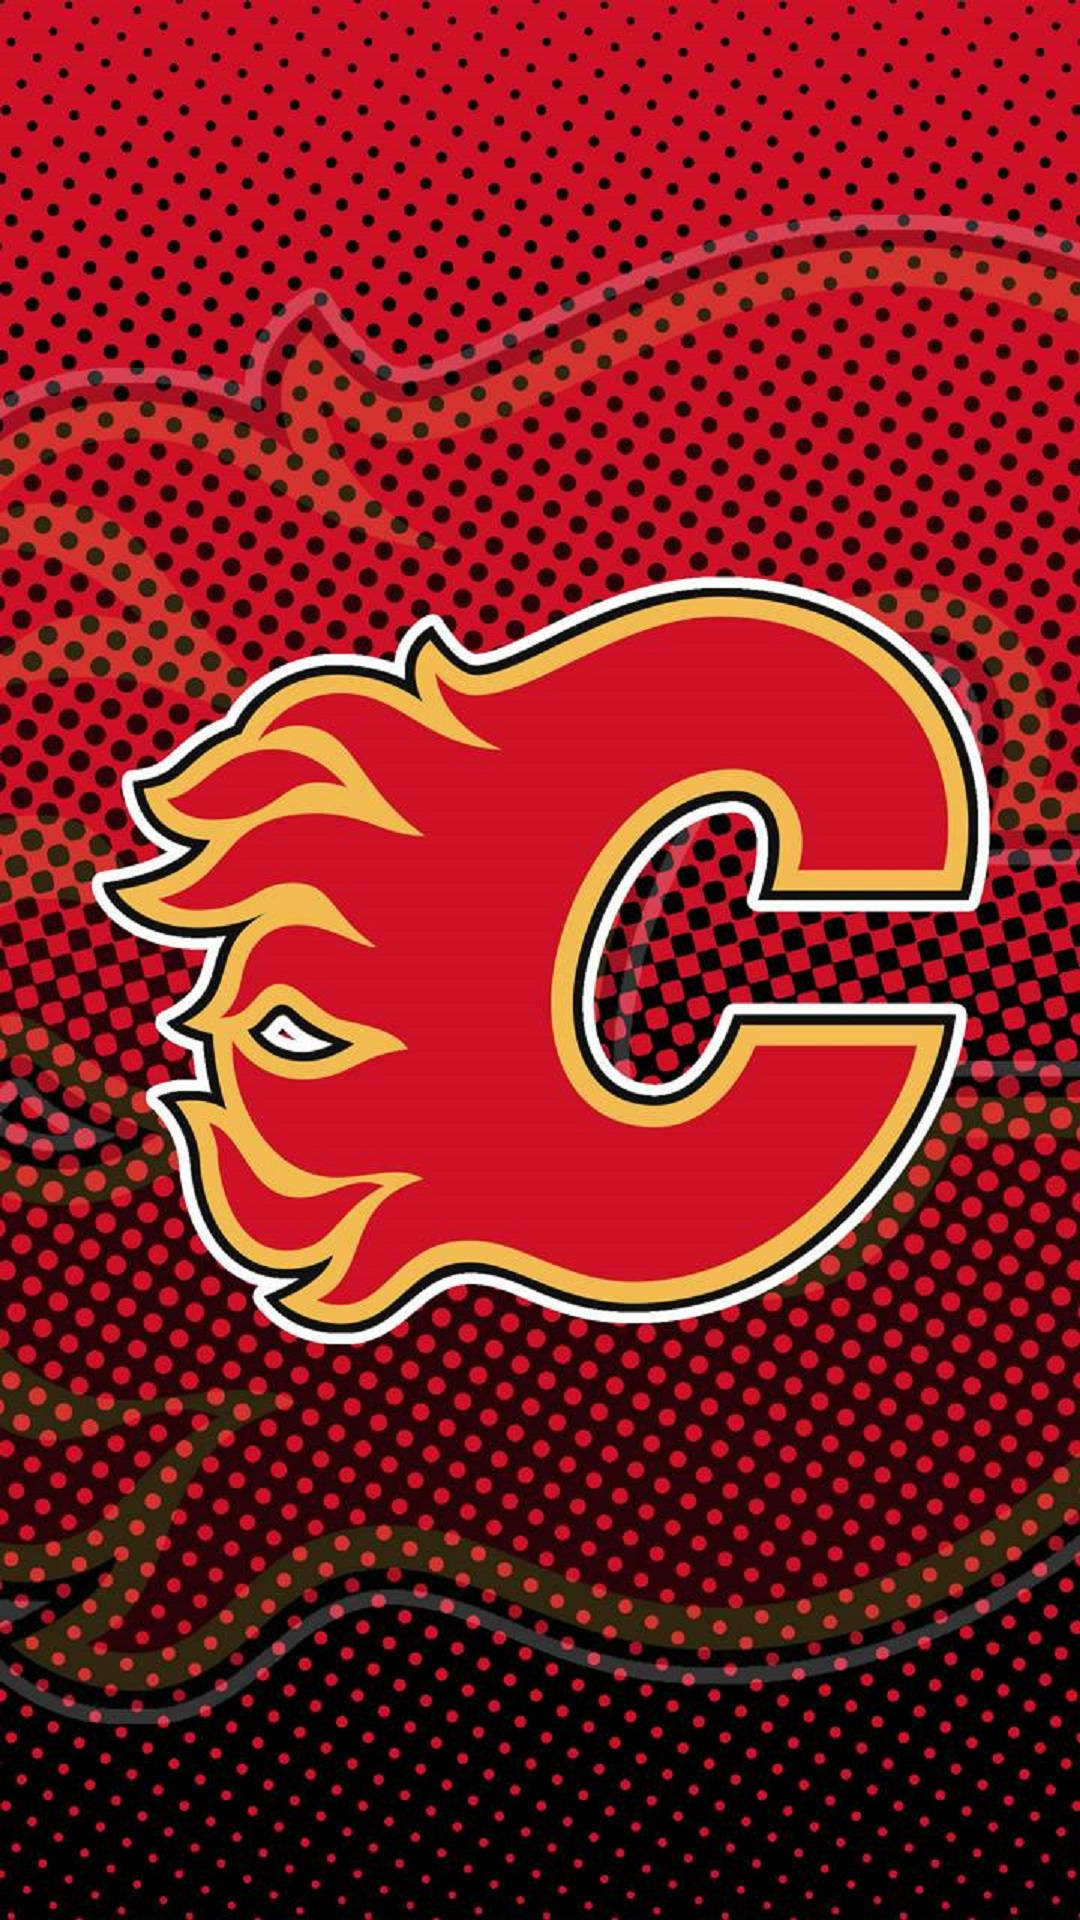 Red And Black Dotted Calgary Flames Logo Wallpaper